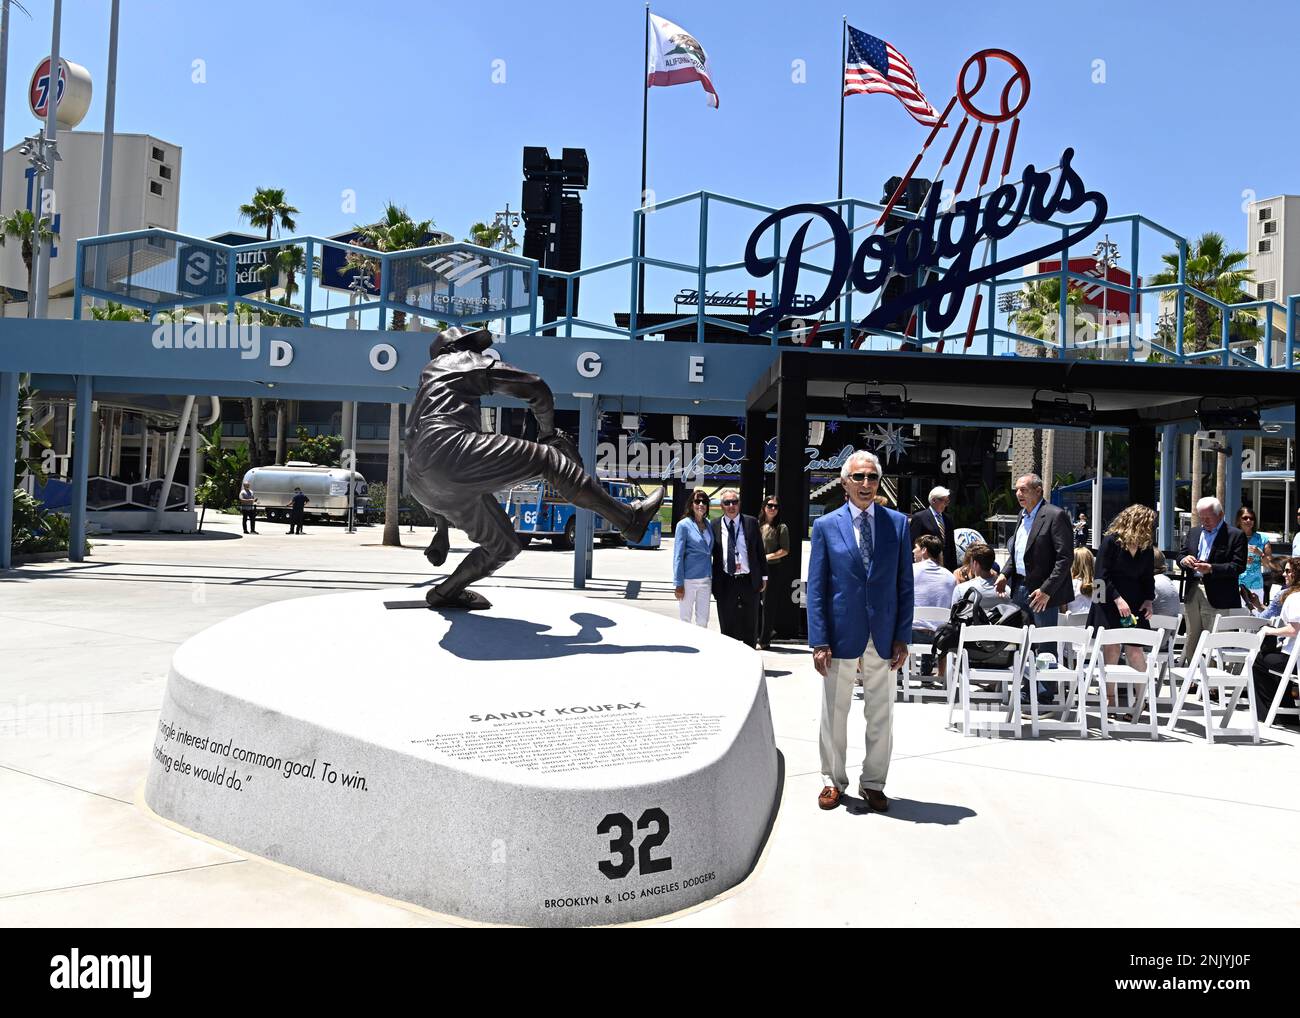 Dodgers honor Koufax with statue